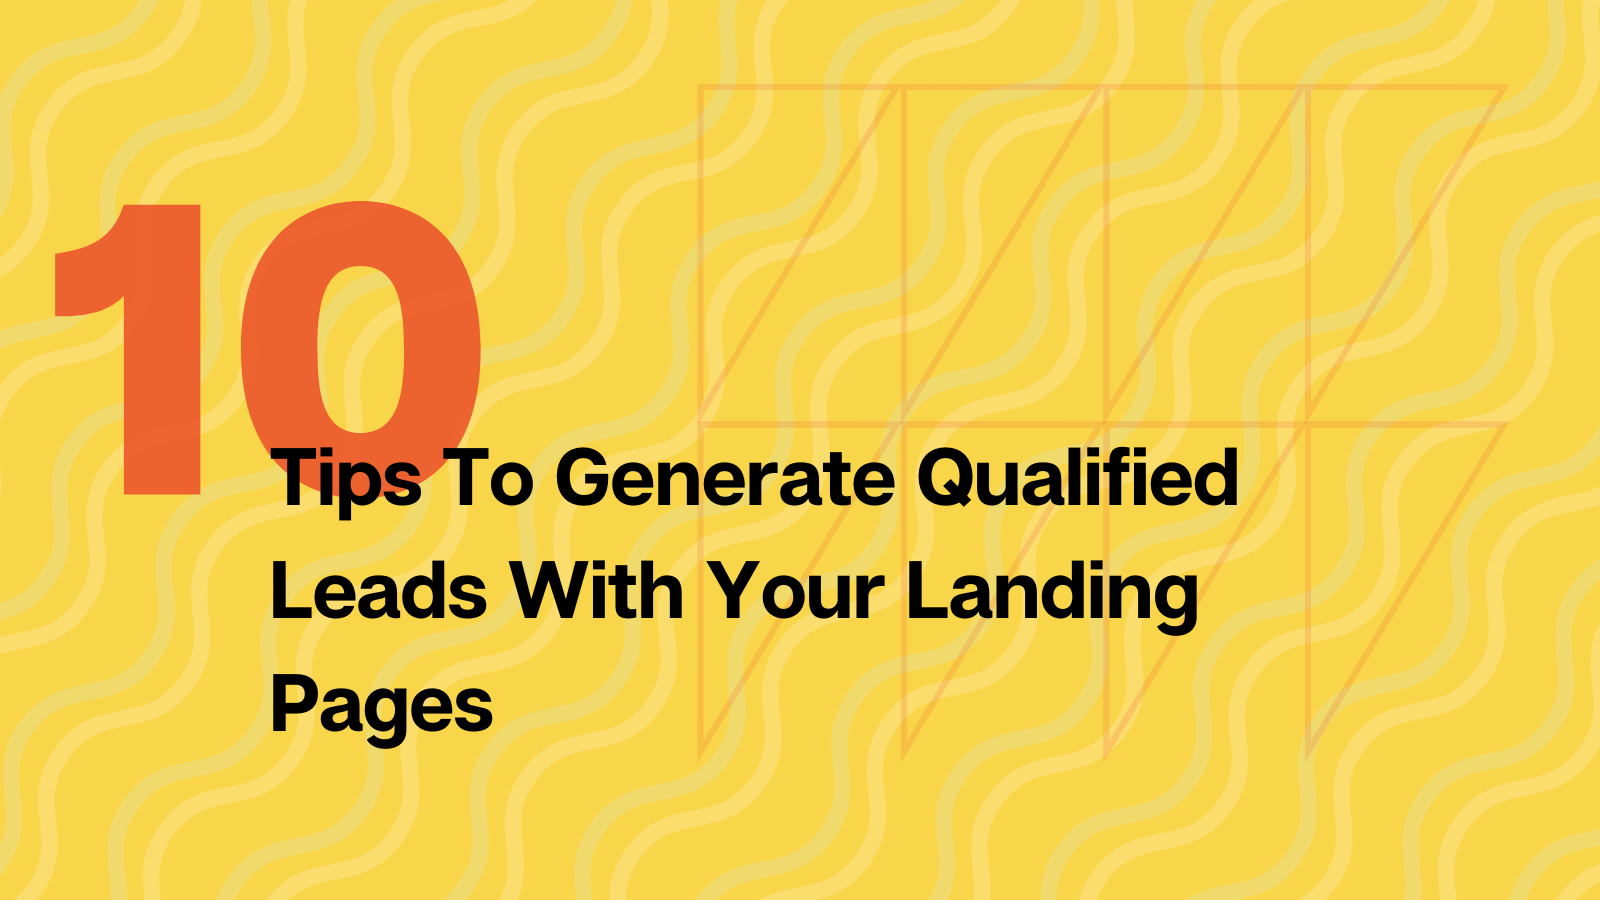 10 Tips To Generate Qualified Leads With Your Landing Pages